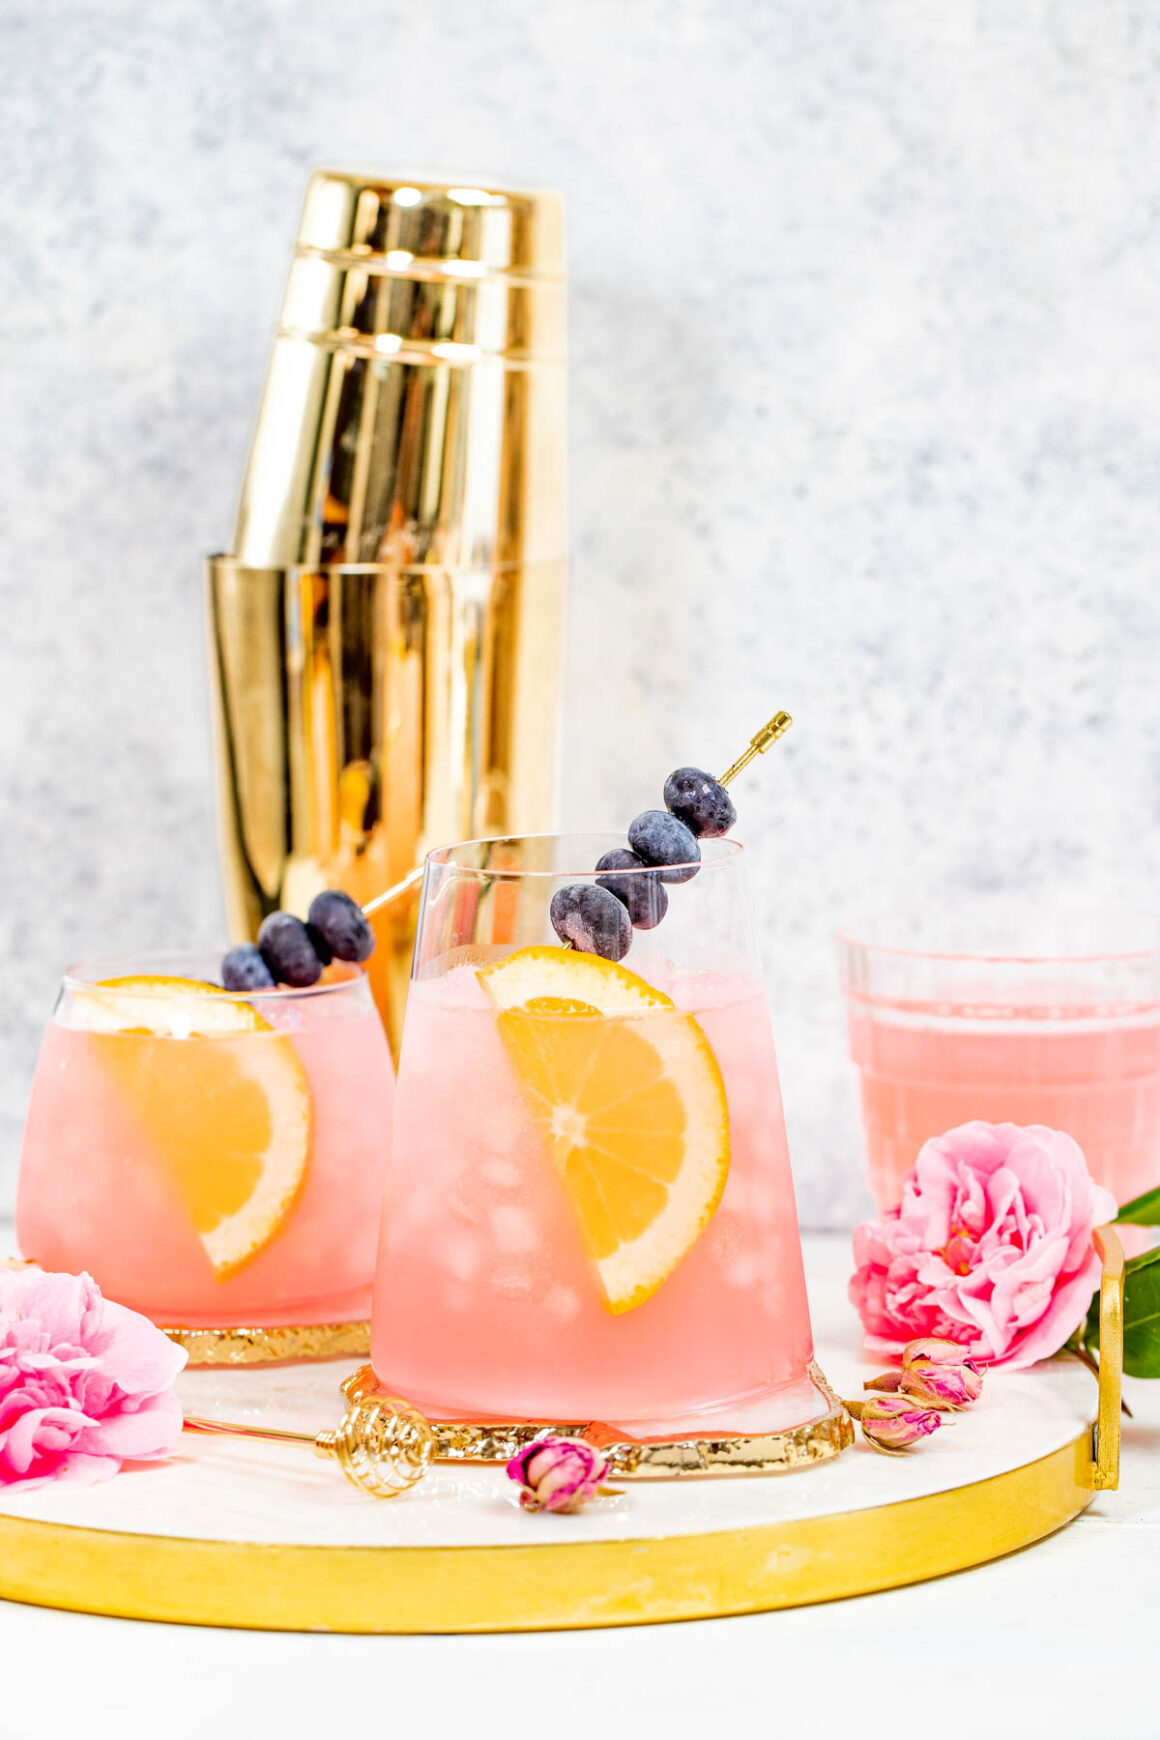 2 rose cocktail recipes with a blueberries skewer as a garnish